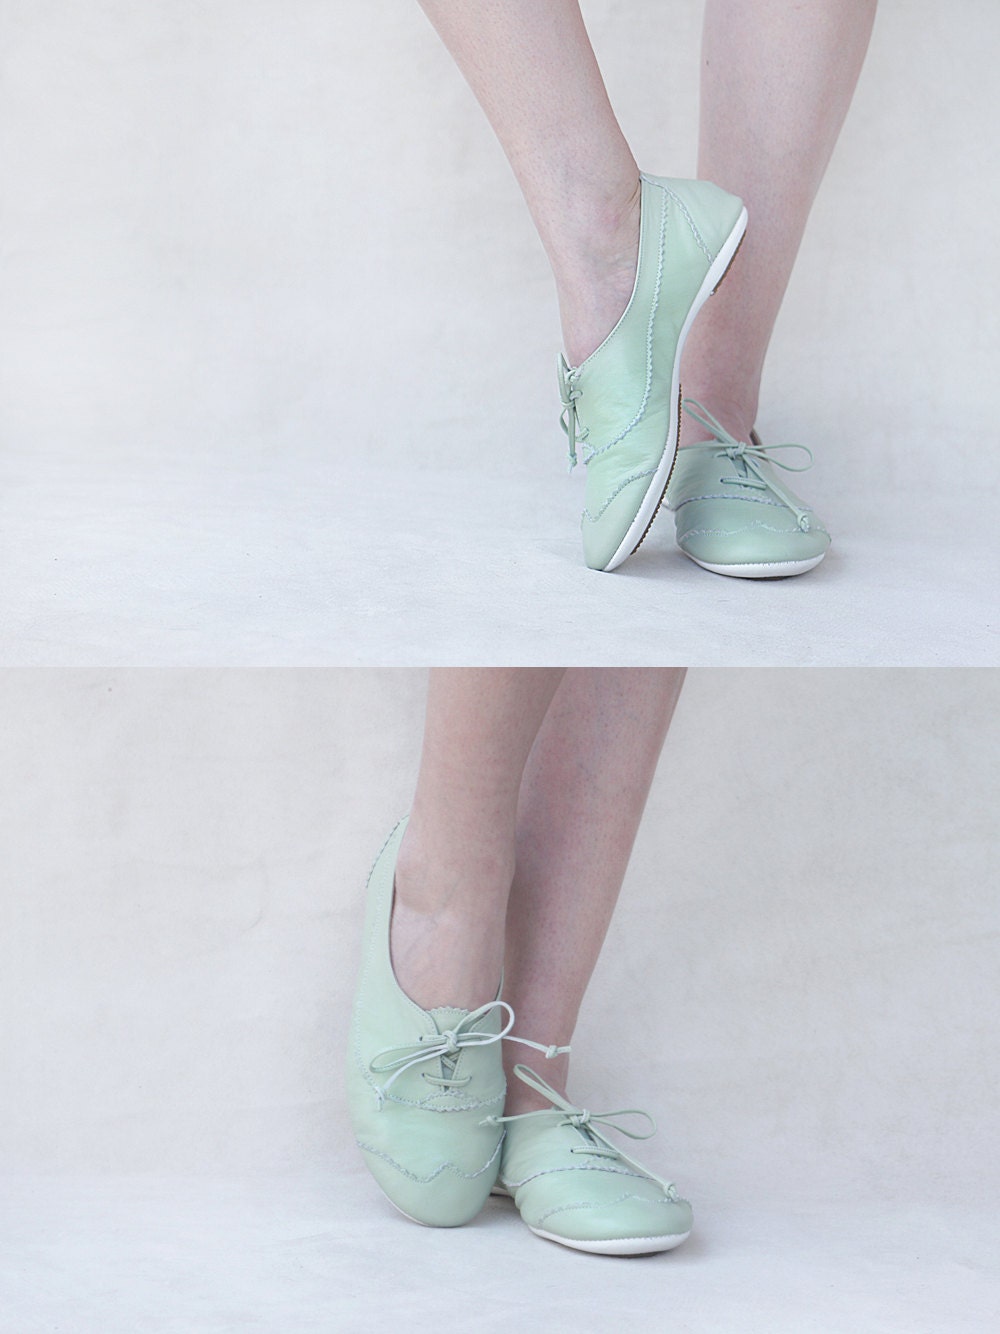 Flat shoes - Mint Oxfords - Handmade Pastel Leather oxford shoes -  CUSTOM FIT - TheDrifterLeather